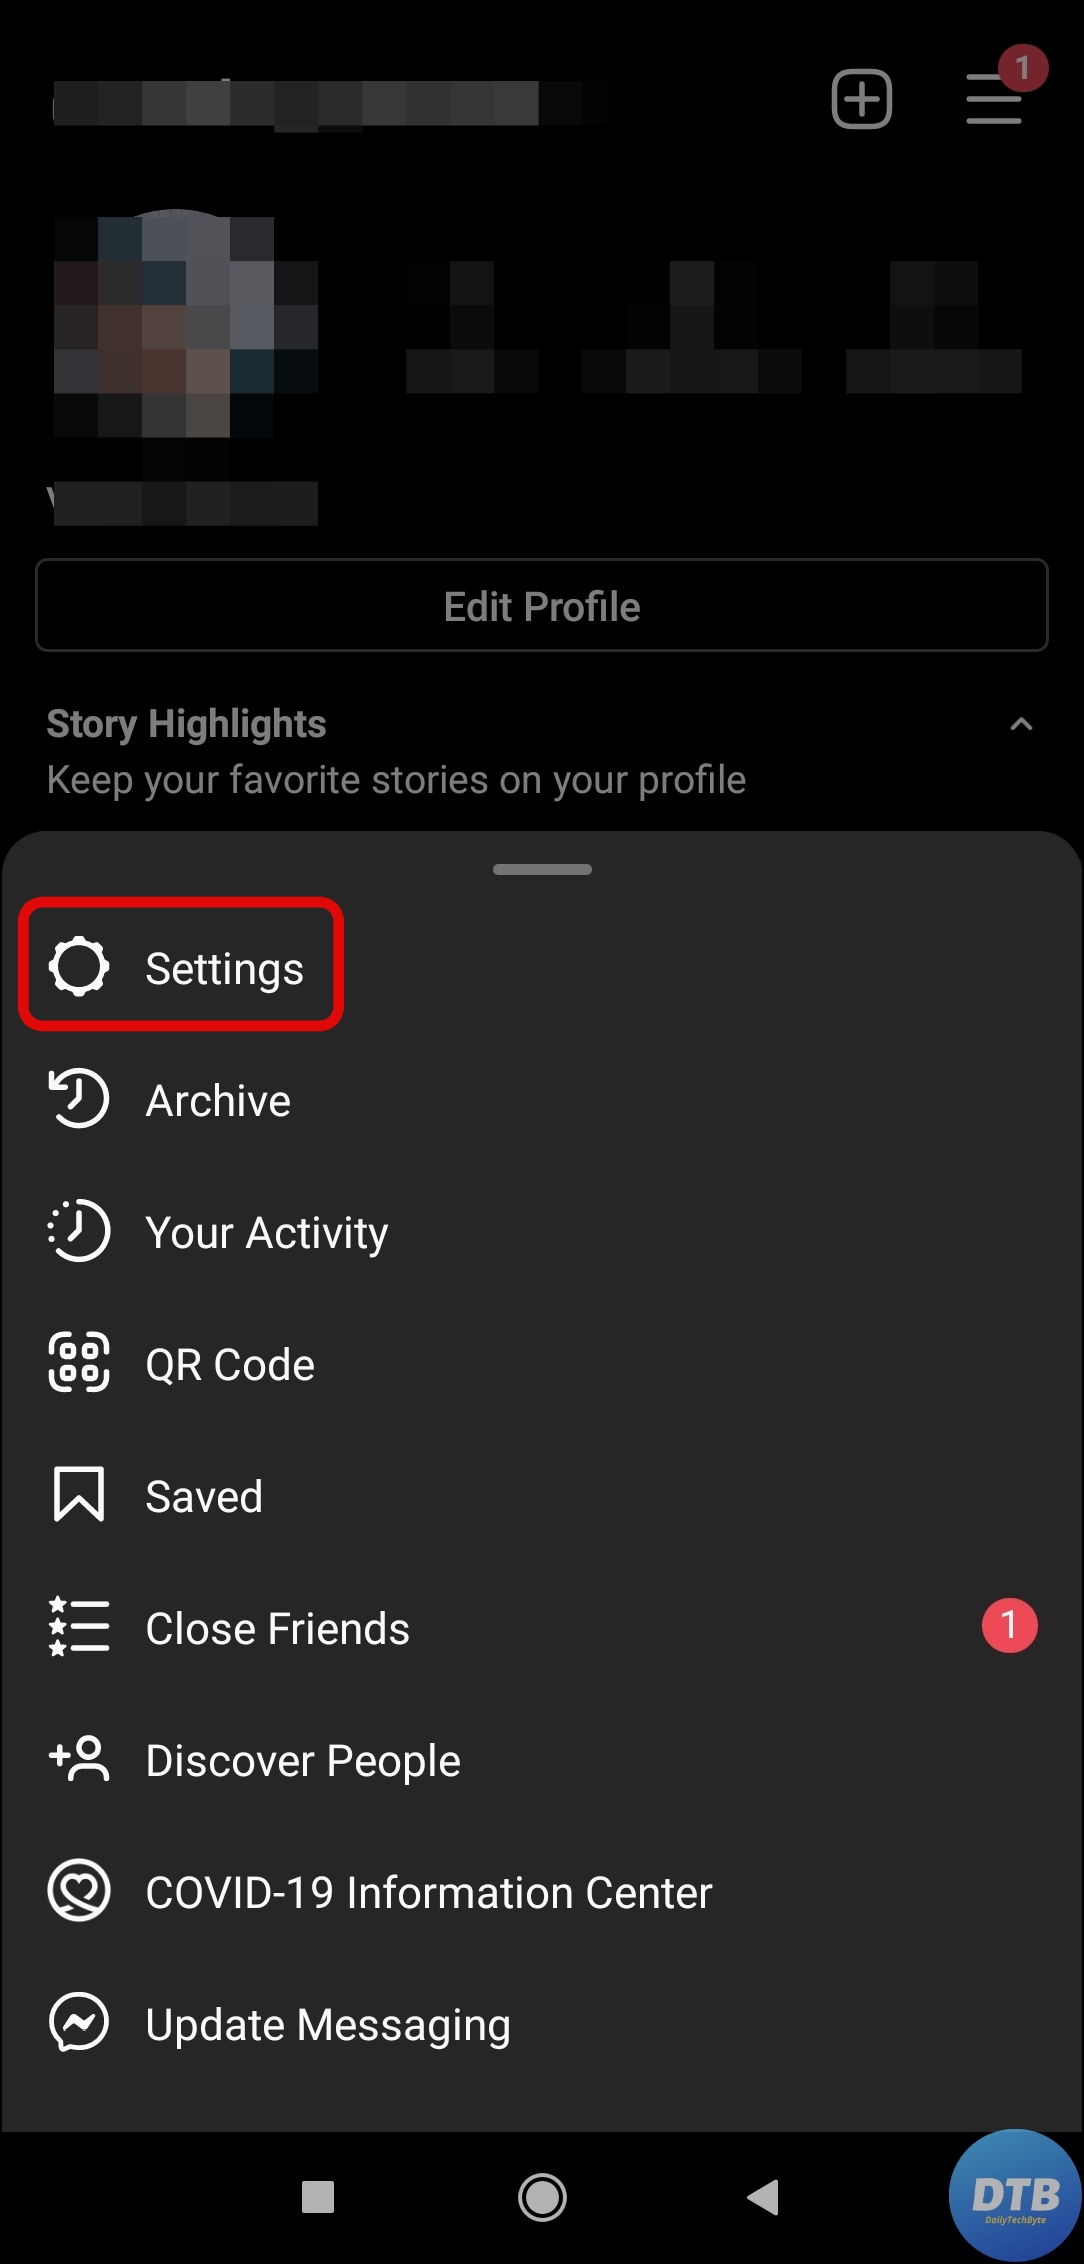 Contact Instagram Support to Fix Instagram Followers Count Not Updating